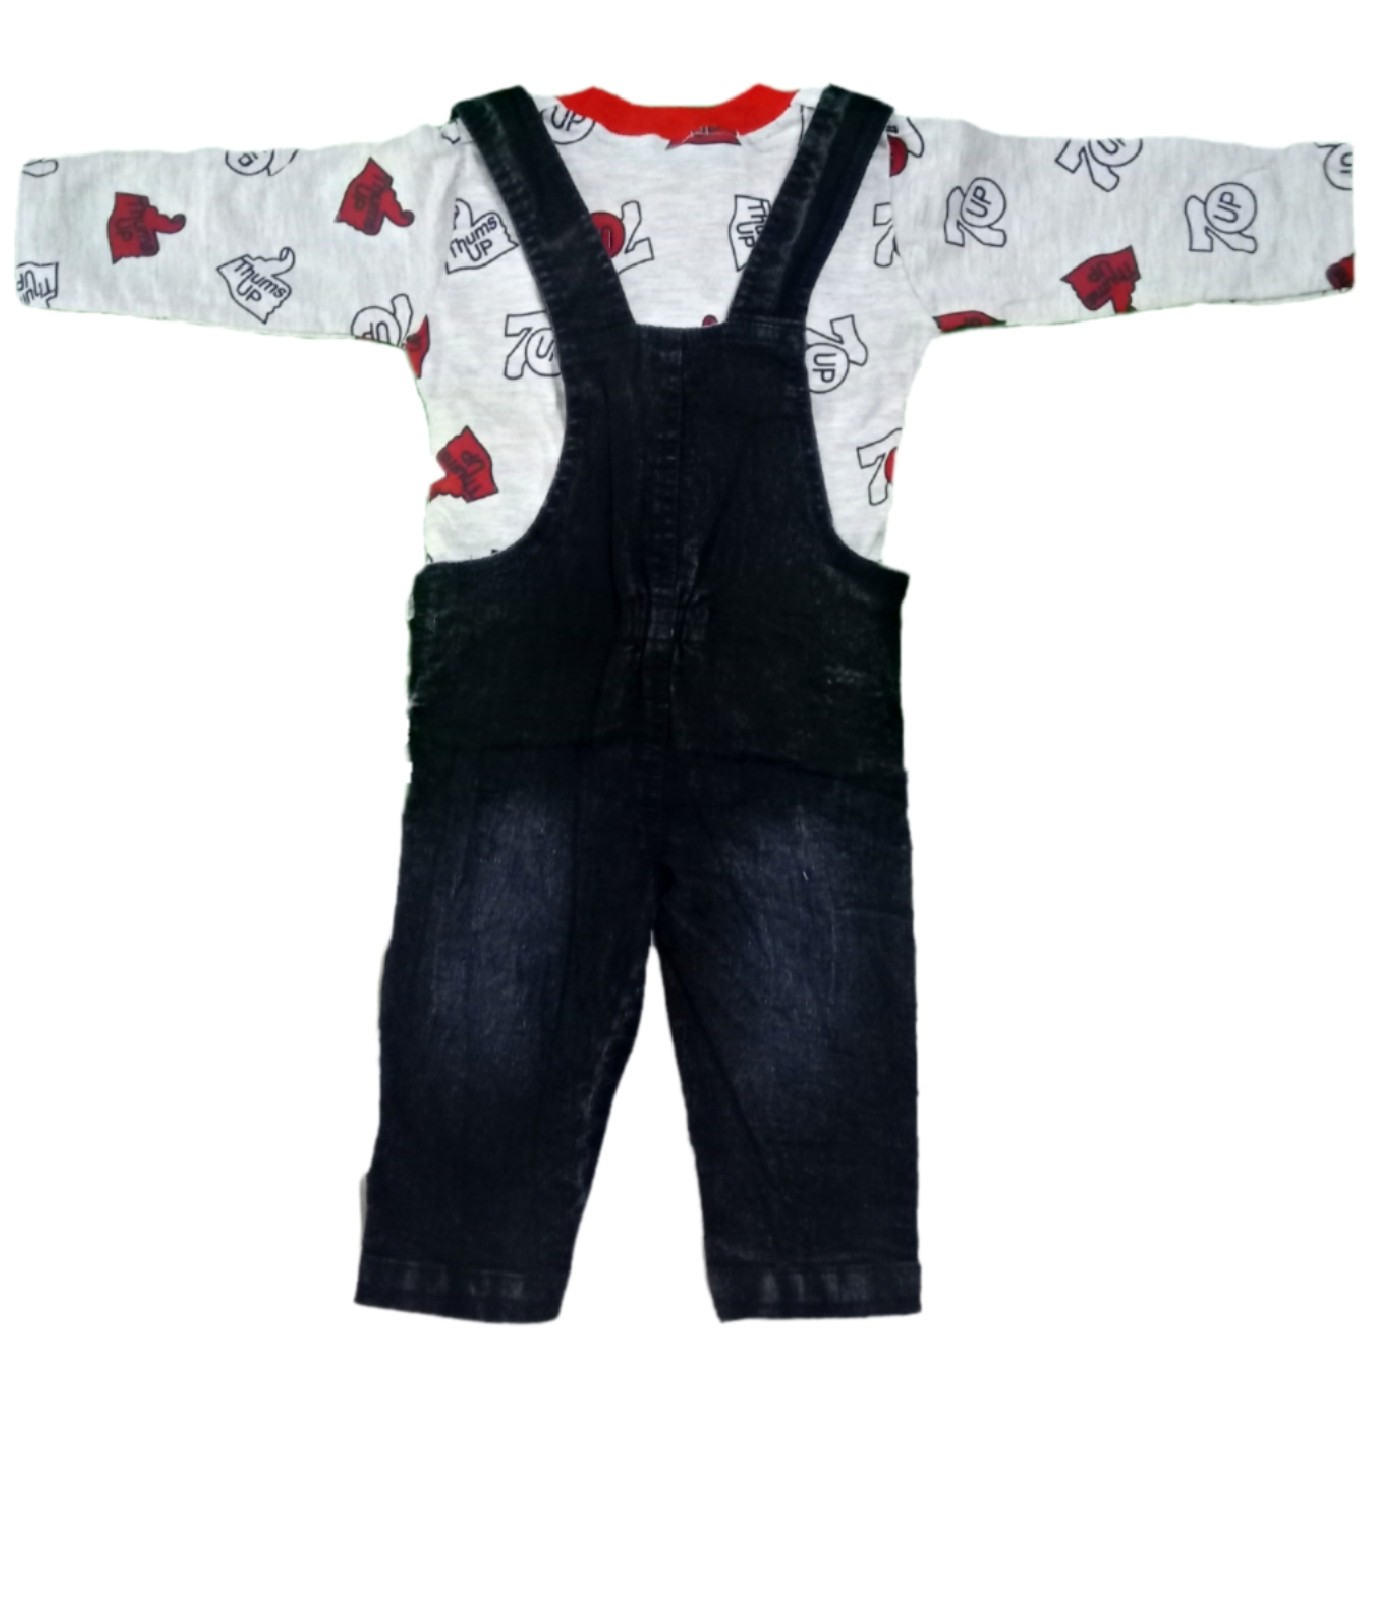 Buy Organic Personalised Baby Dungarees Online in India - Etsy